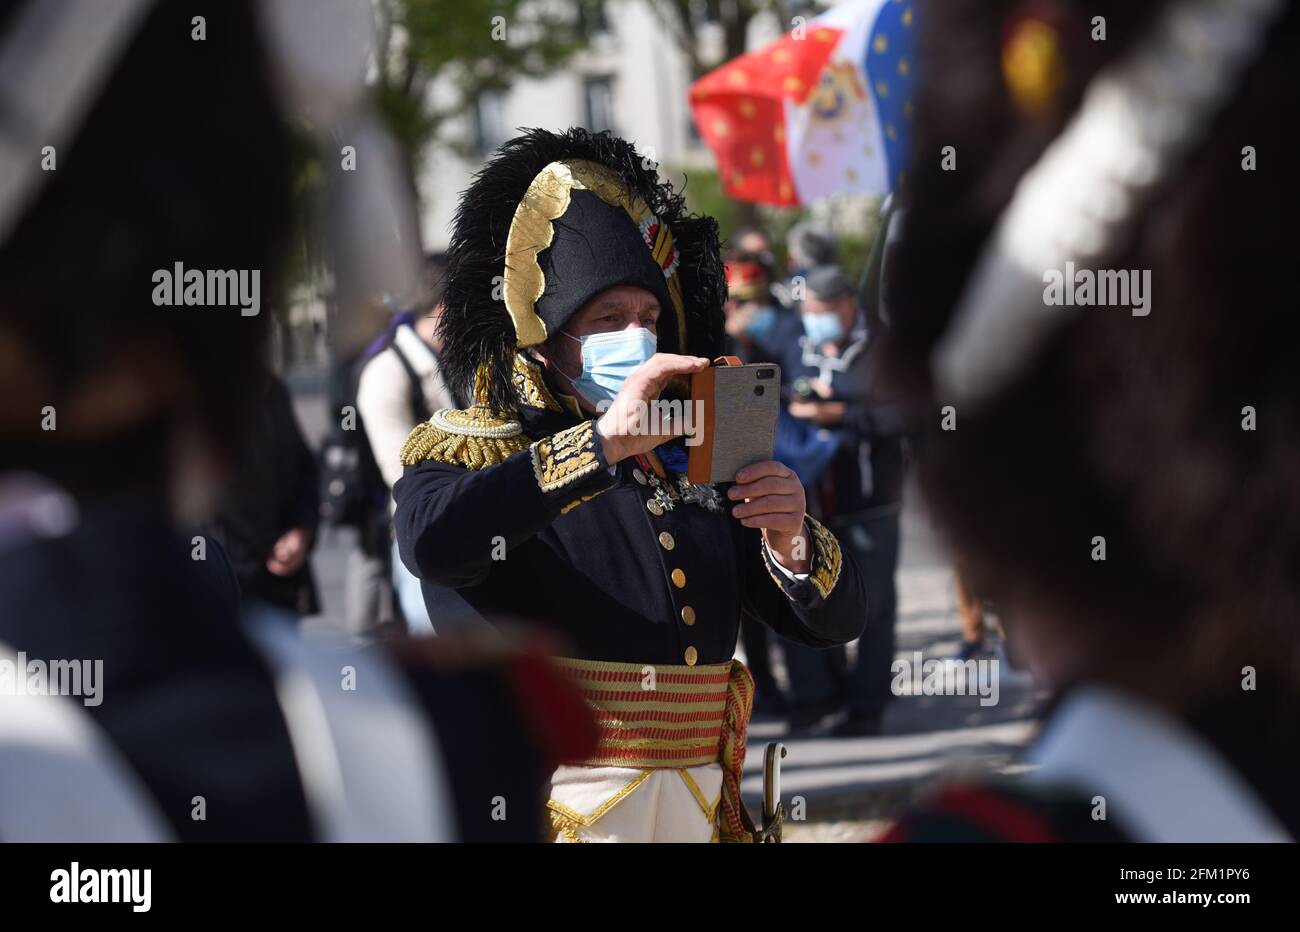 *** STRICTLY NO SALES TO FRENCH MEDIA OR PUBLISHERS - RIGHTS RESERVED ***May 05, 2021 - Paris, France: A reenactor dressed as French emperor Napoleon takes a picture with his smartphone. He wears a mask because of the Covid pandemic. Reenactors dressed as soldiers of Napoleon's Grande Armee gathered in front of the Invalides church, where the French emperor's tomb is located, to mark the bicentenary of his death. Stock Photo